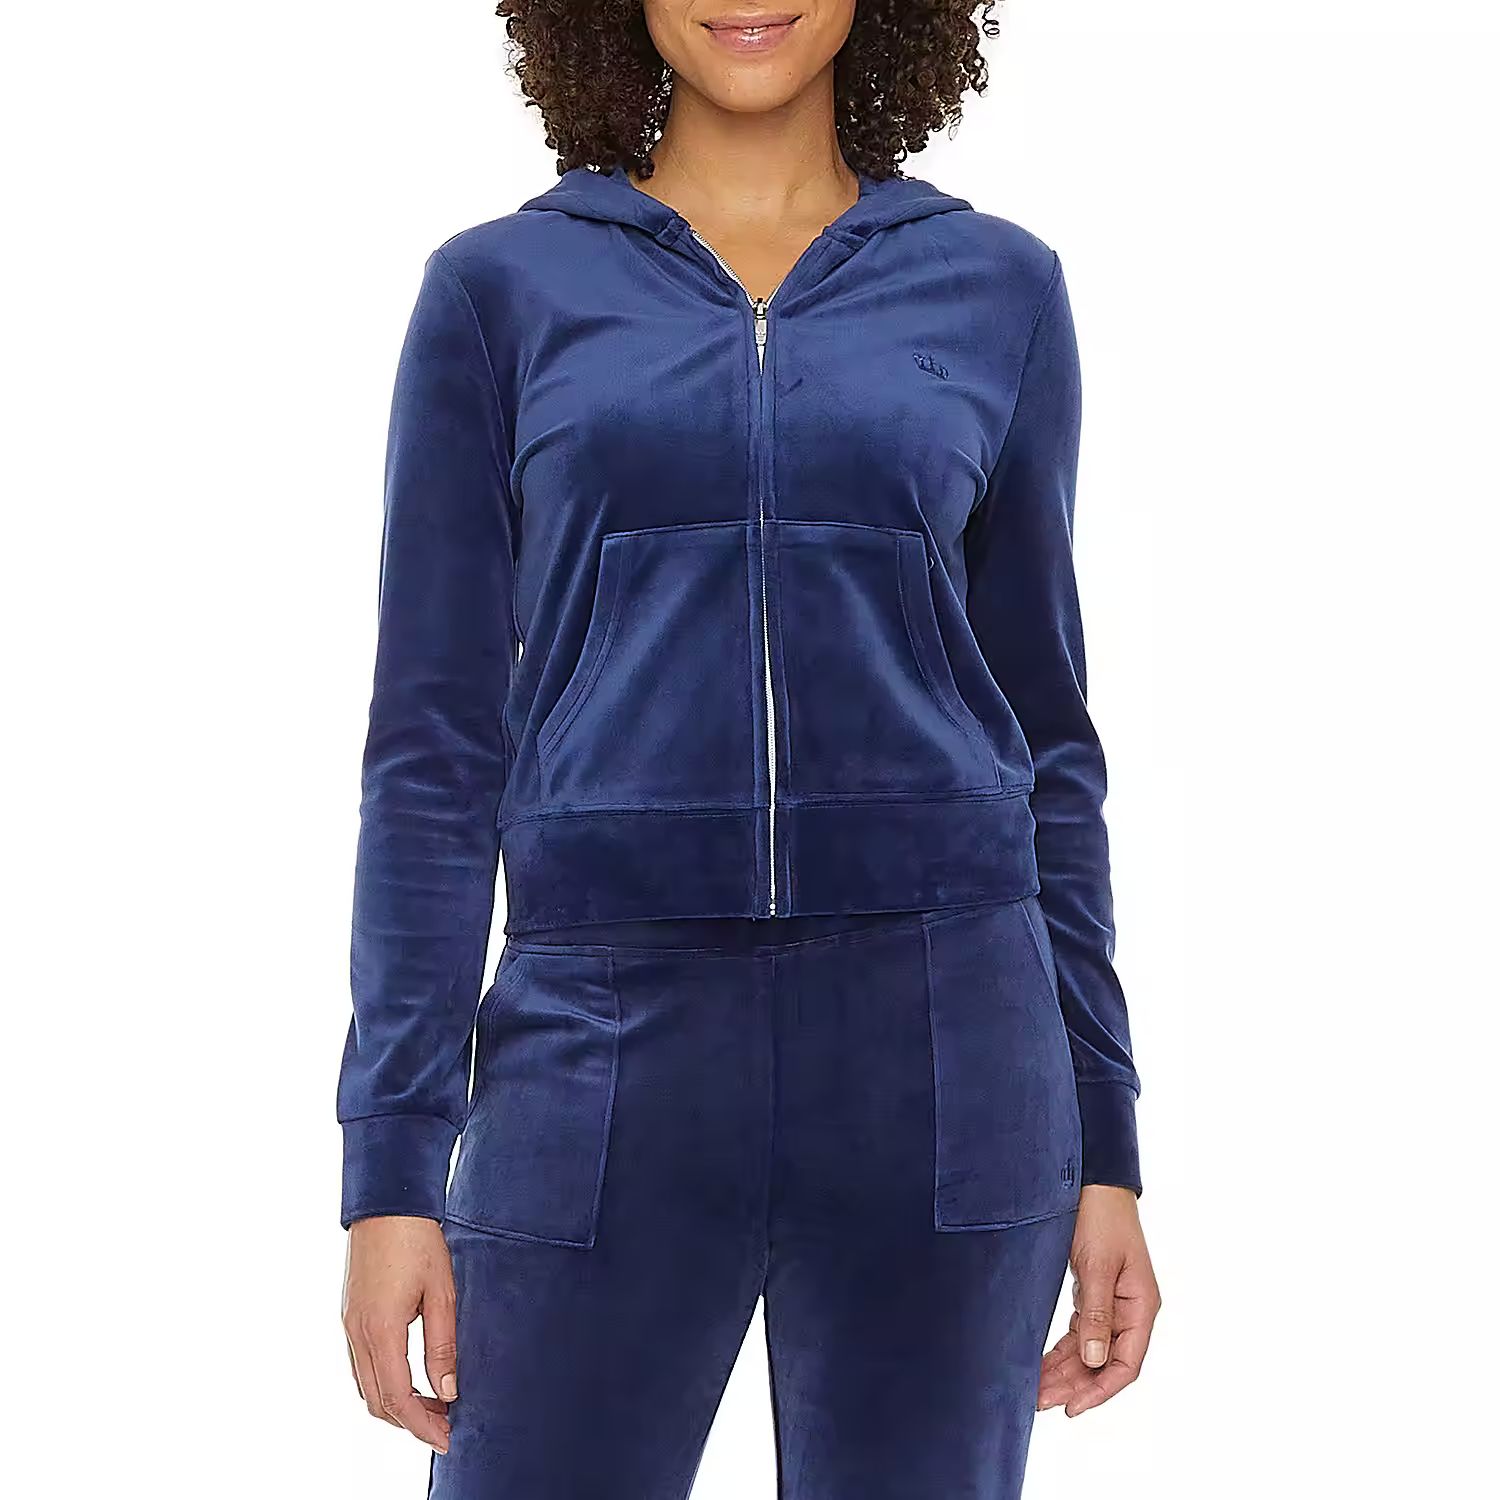 new!Juicy By Juicy Couture Midweight Track Jacket | JCPenney